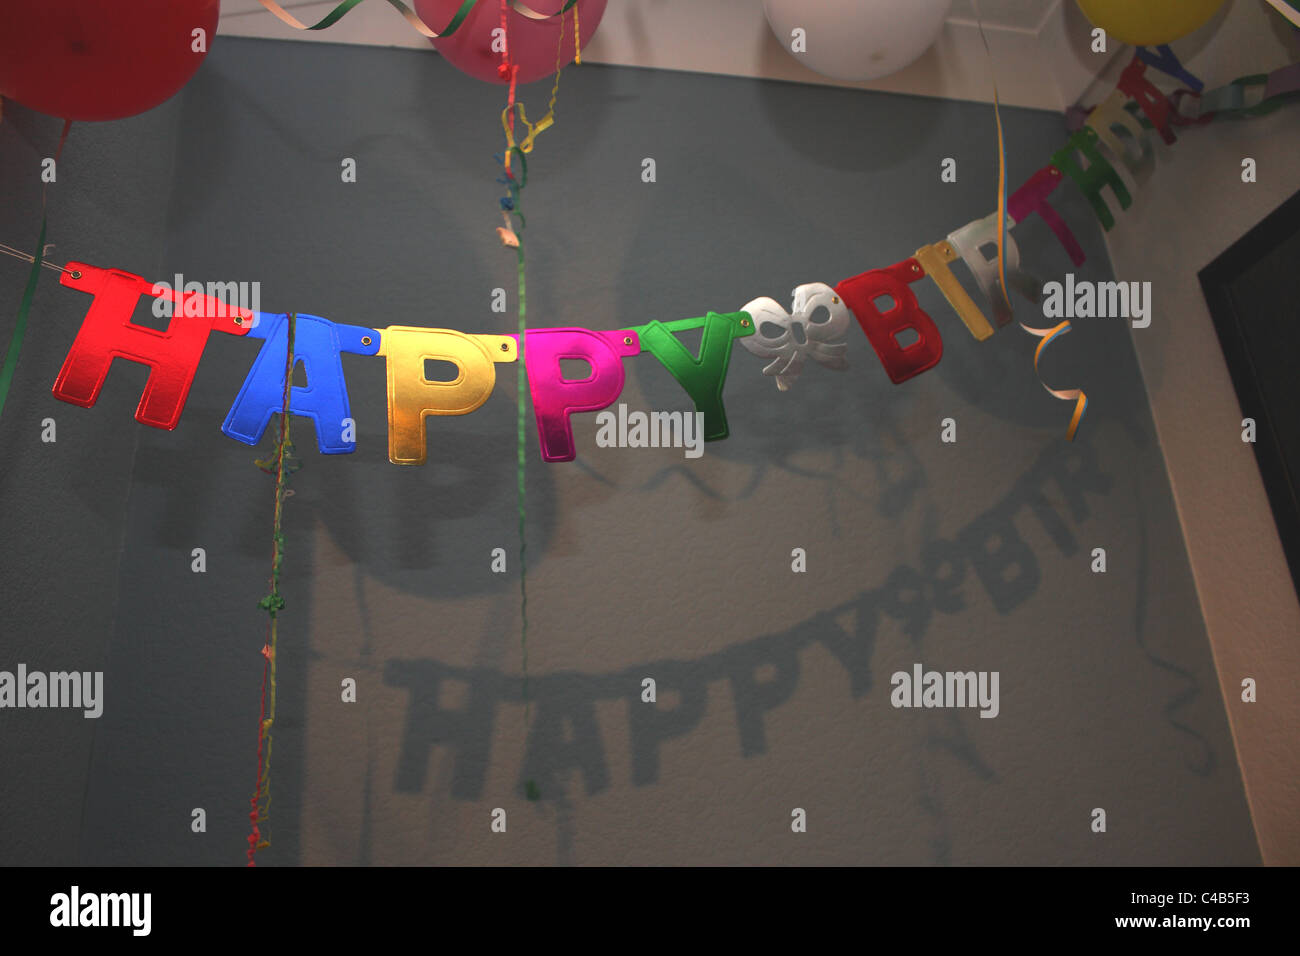 A celebration with a Happy Birthday banner sign hanging on the ceiling; perfect for a childs birthday party. Stock Photo